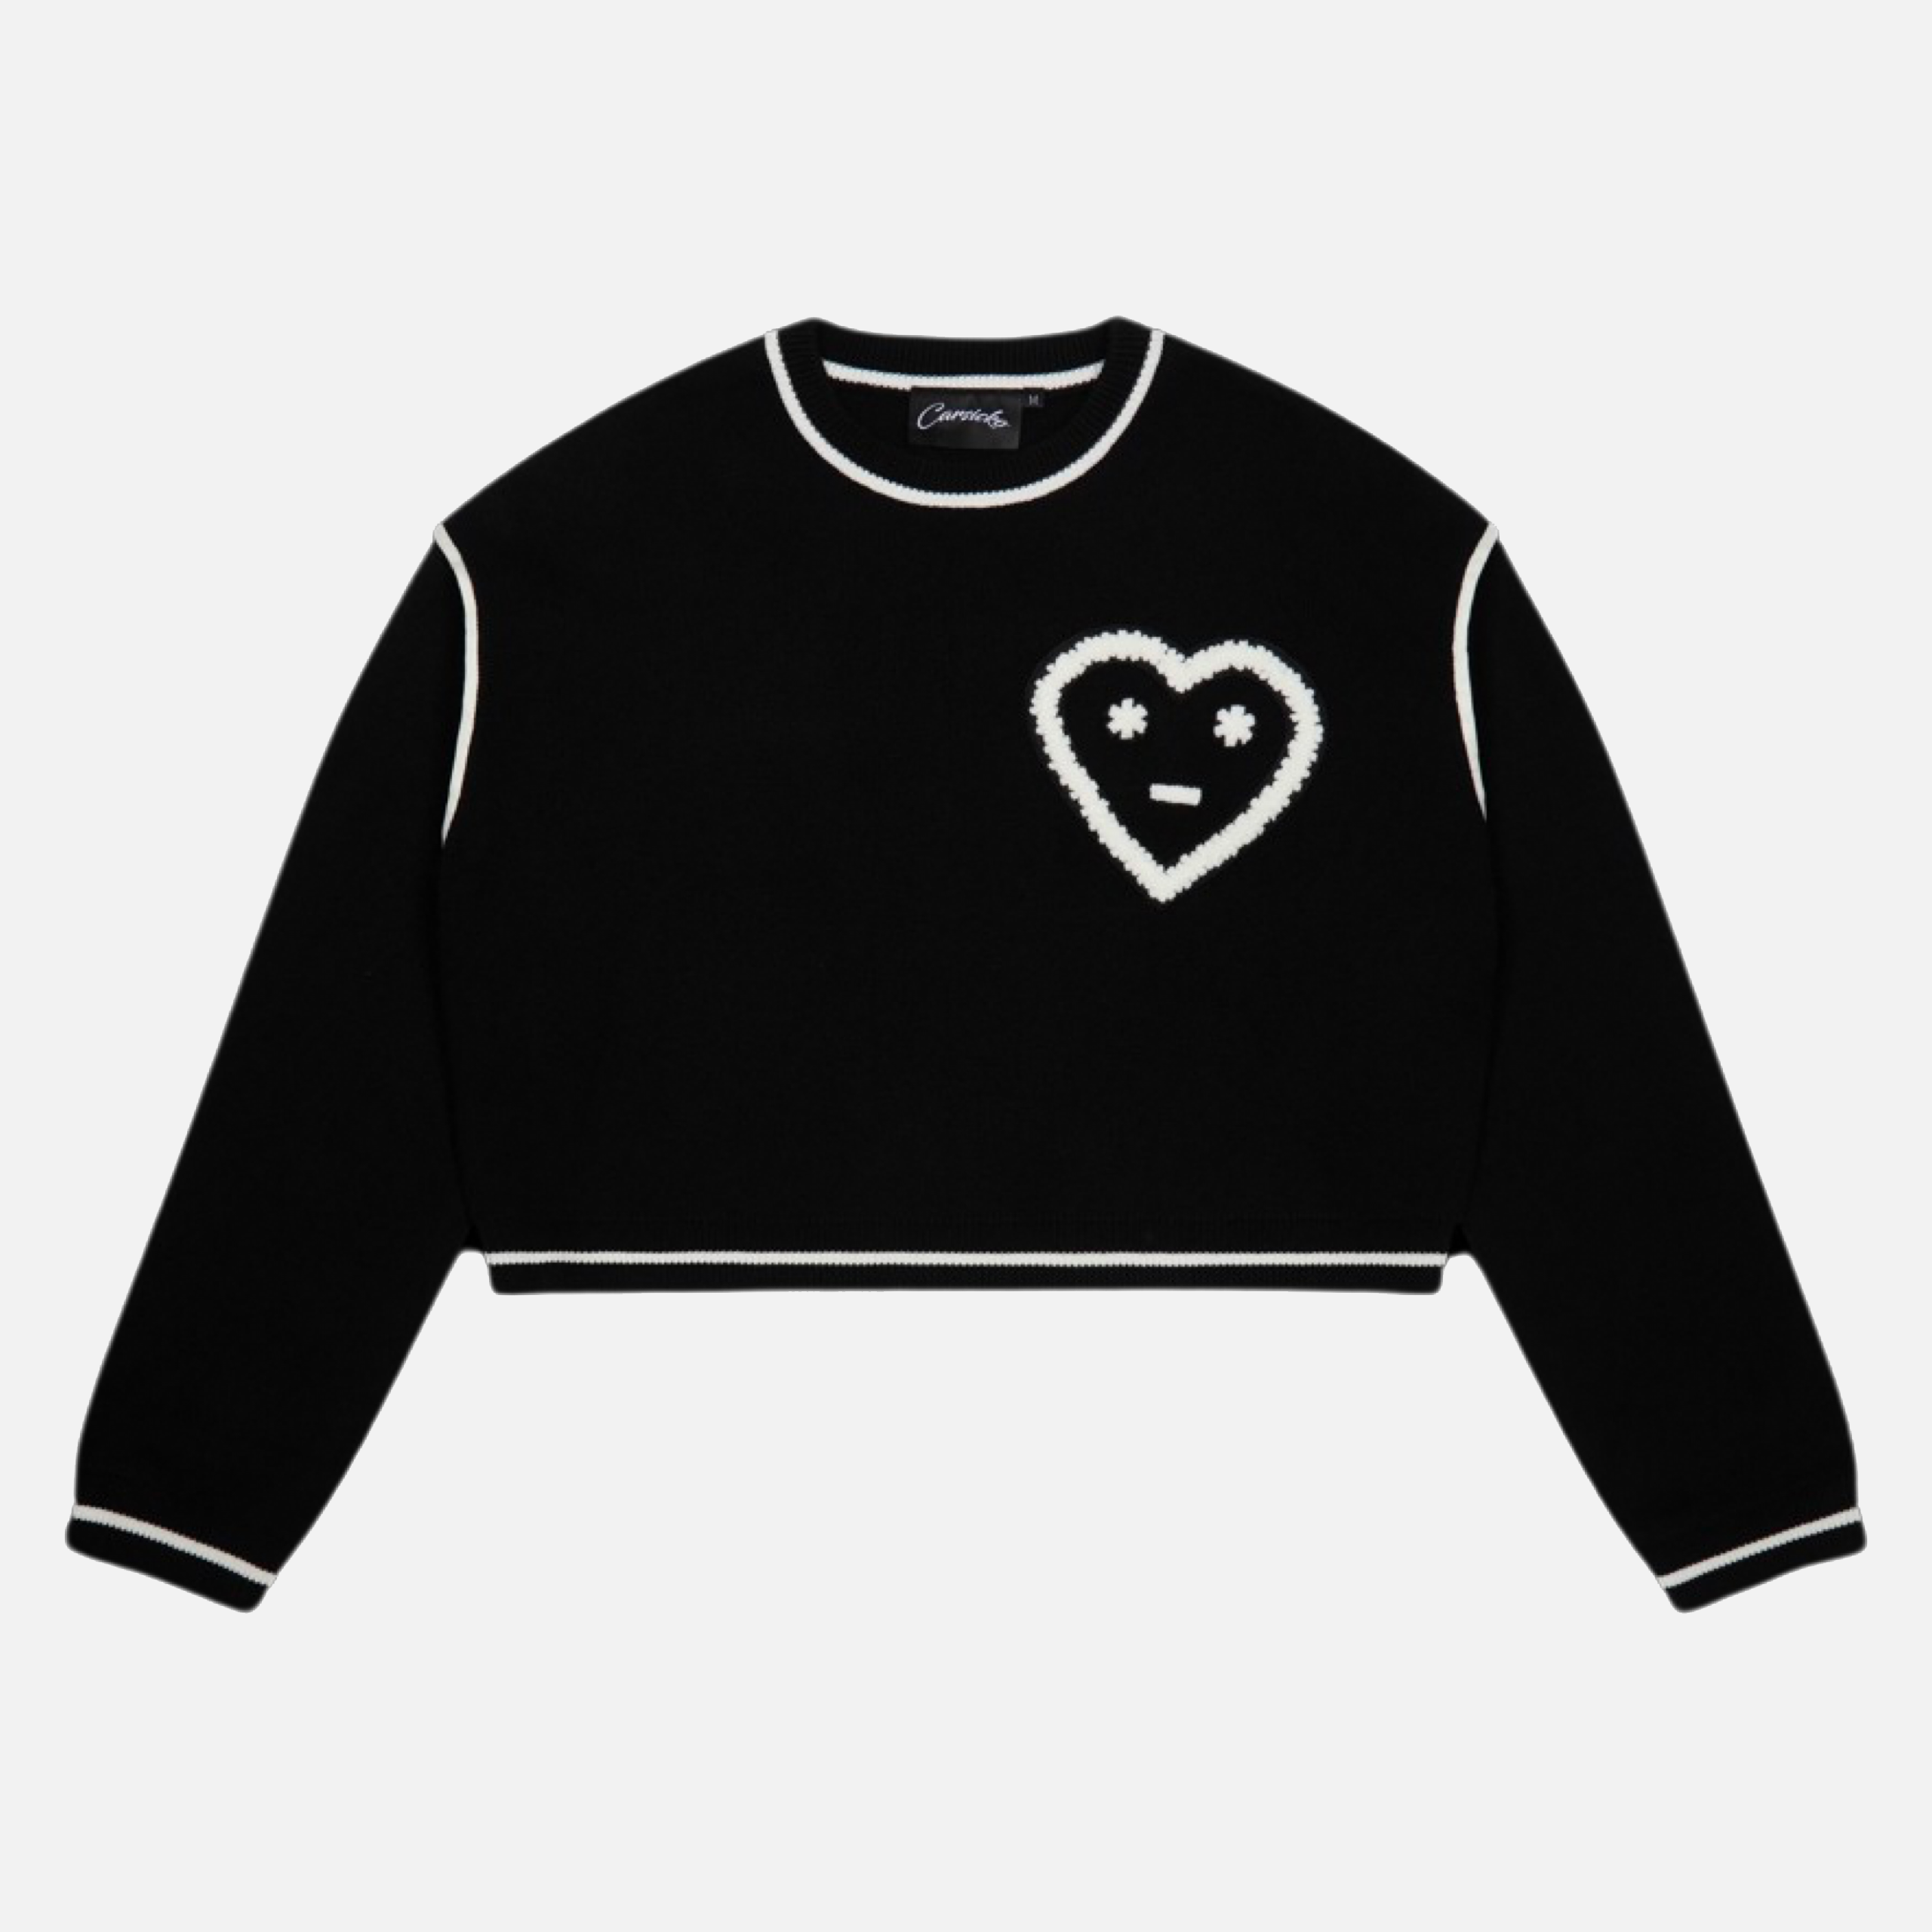 Black Carsicko knit sweater with 'Don't Touch' design.